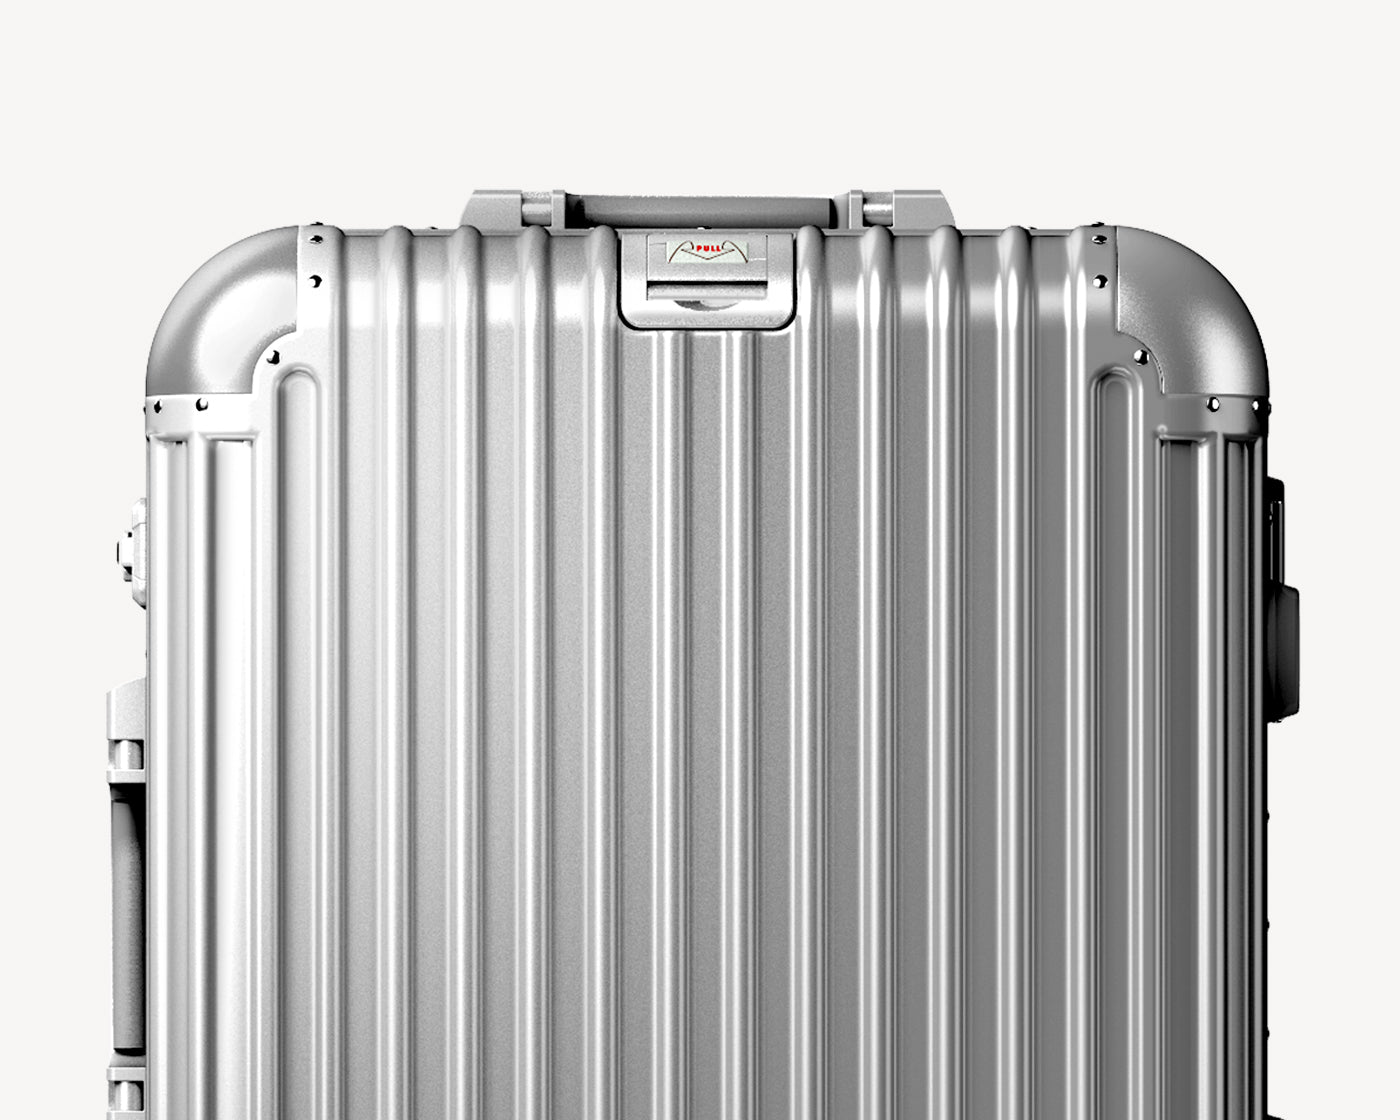 Top view of a metallic silver luggage  with a sturdy ribbed design and a central branded logo latch for secure closure.